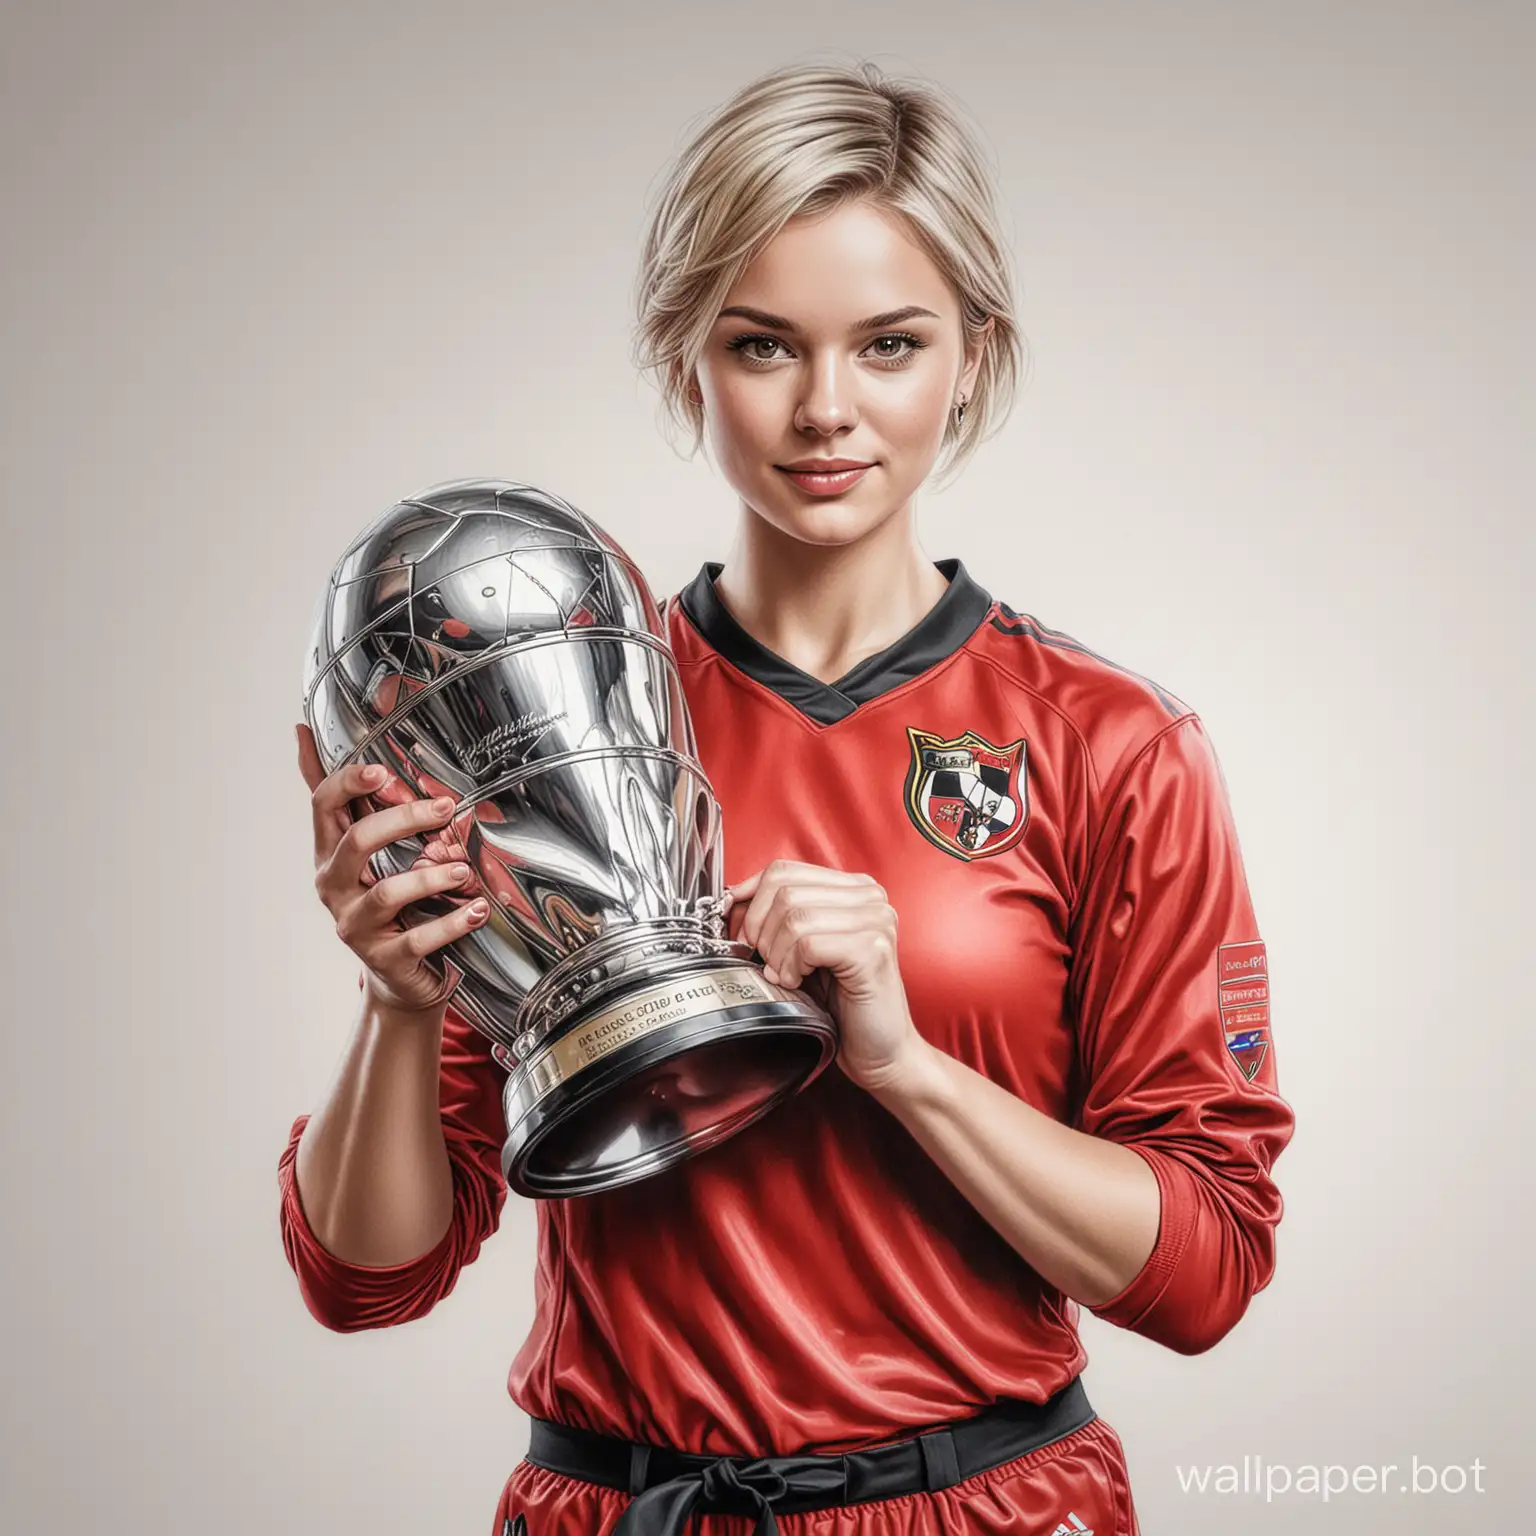 sketch young Anna Rouson 26 years old light short hair 4 breast size narrow waist in red-black football uniform holding a large trophy of champions white background high realism drawing with colored marker